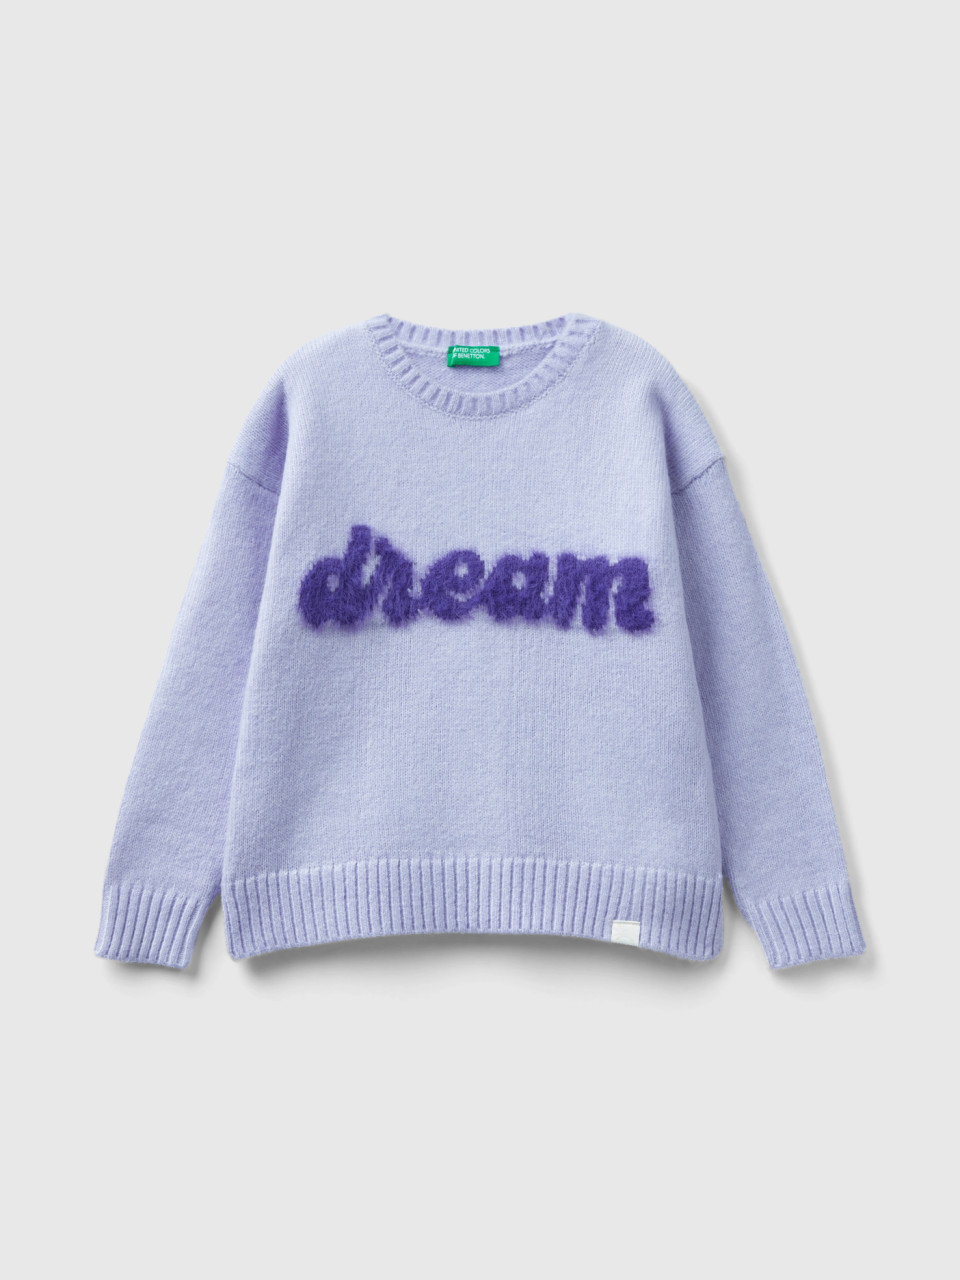 Benetton, Boxy Fit Sweater With Writing, Lilac, Kids